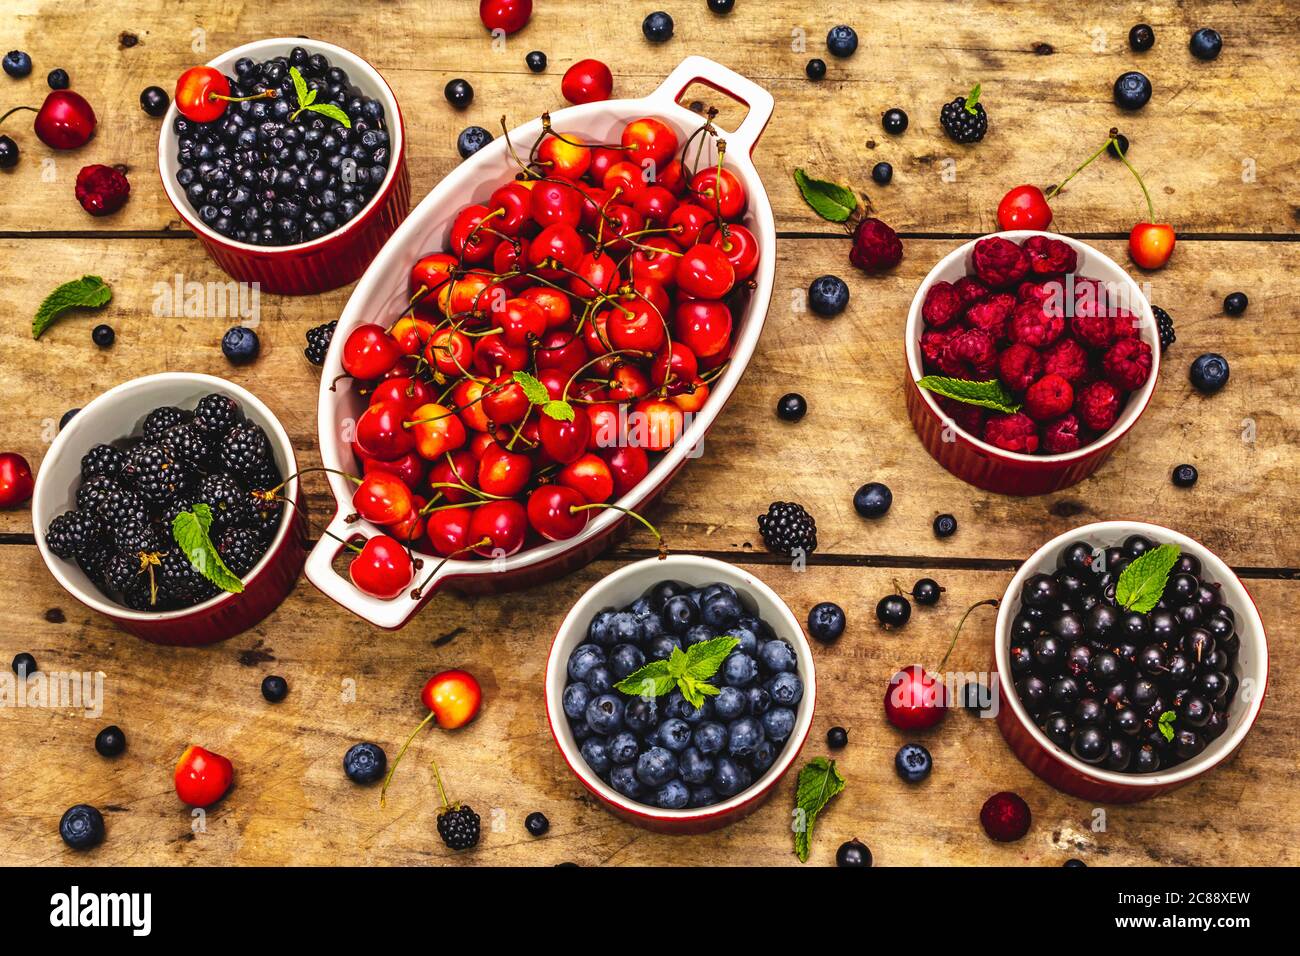 Assorted berries in bowls: bilberry, blueberry, currant, blackberry, cherry and raspberry. Old wooden table background, top view Stock Photo